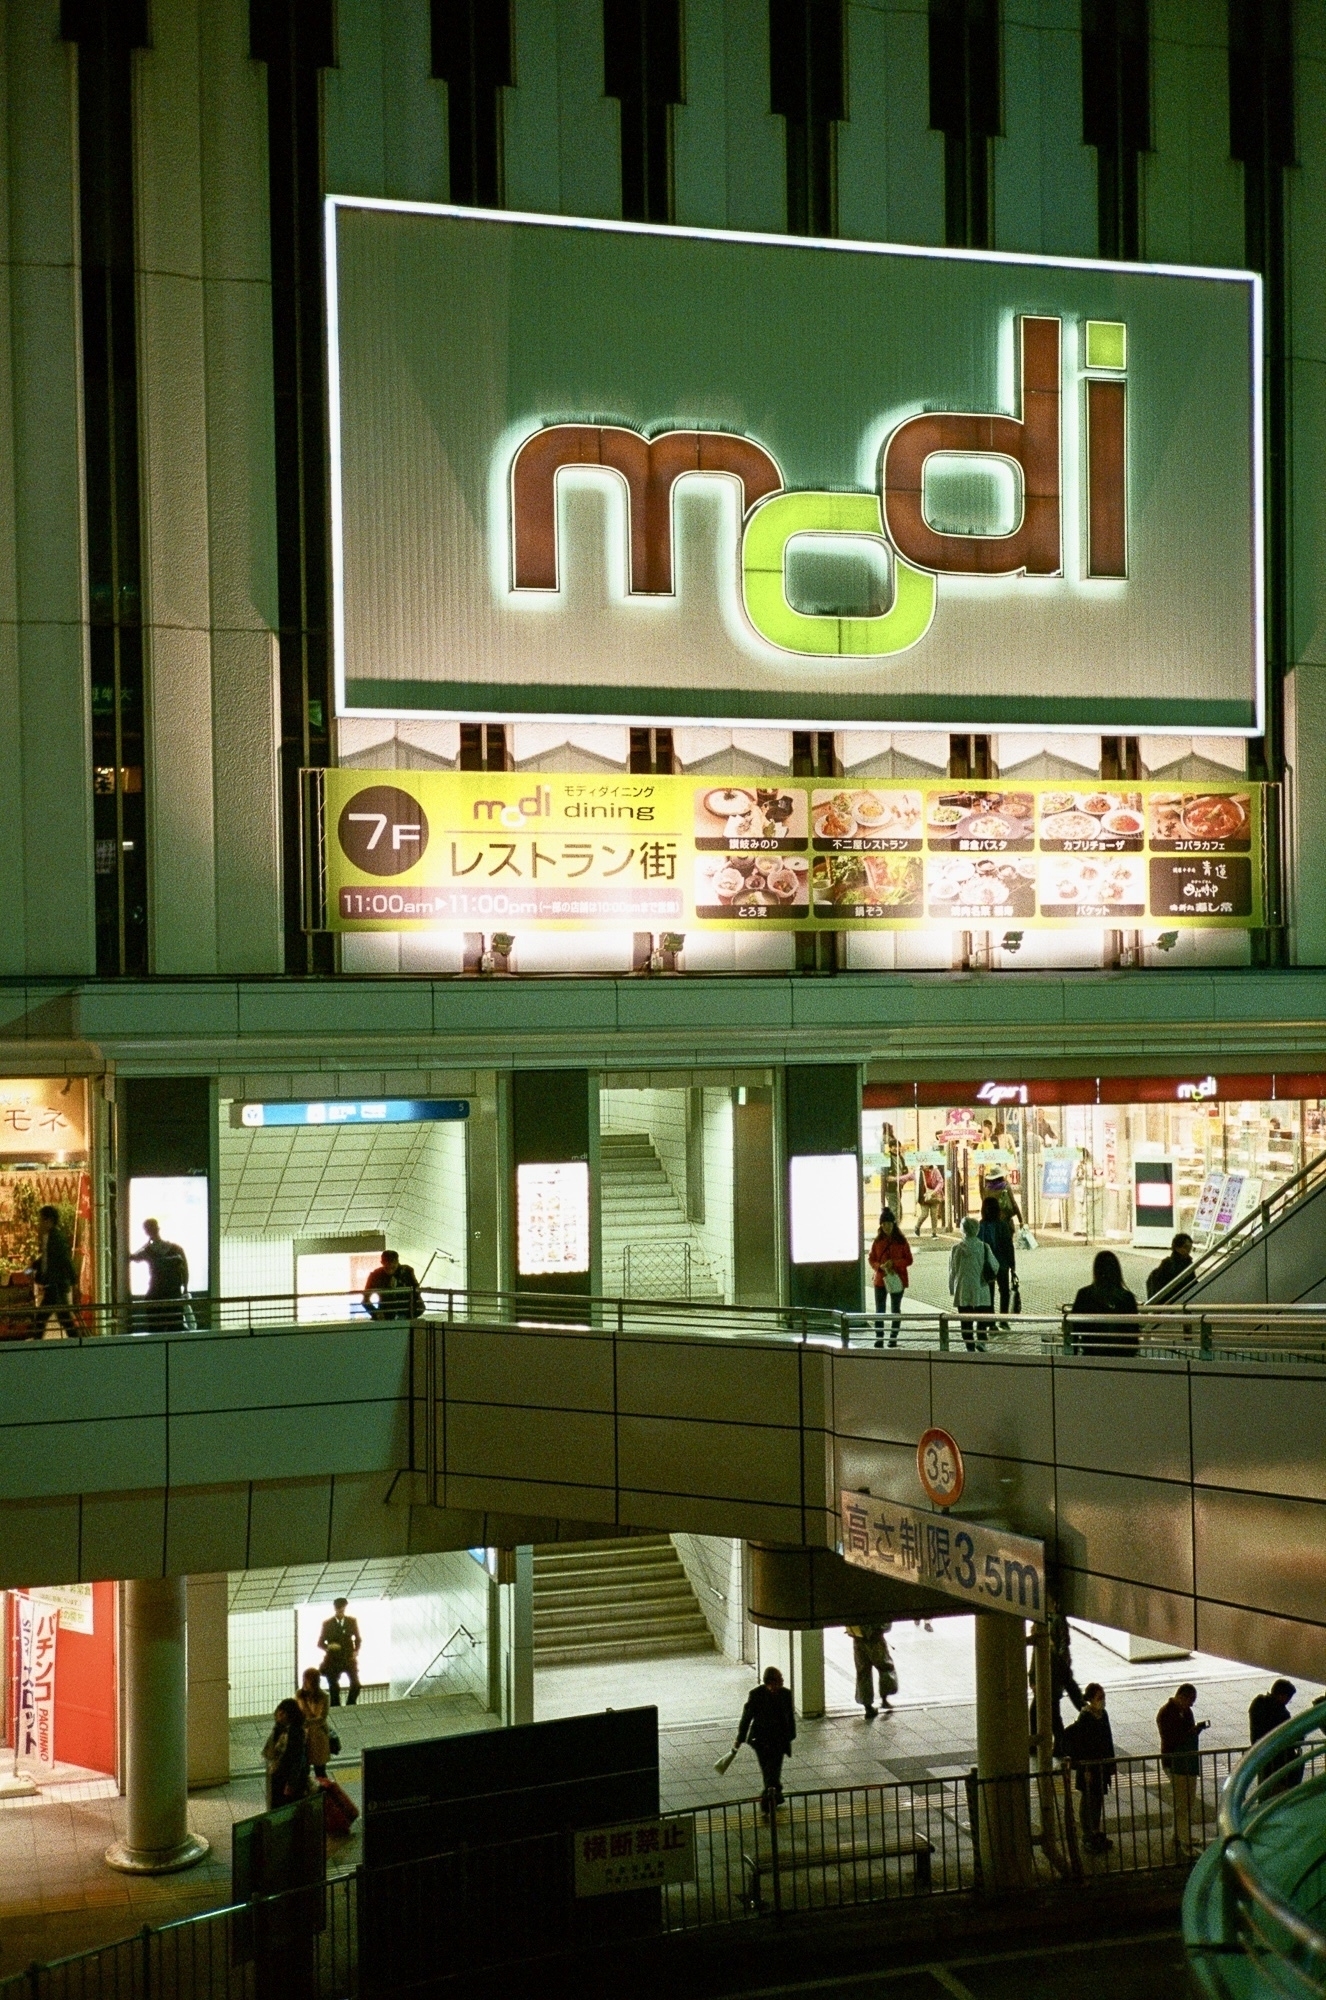 Night view of the “Modi” shopping center building, showing ground and 2F levels, taken from the platform plaza outside Totsuka station.